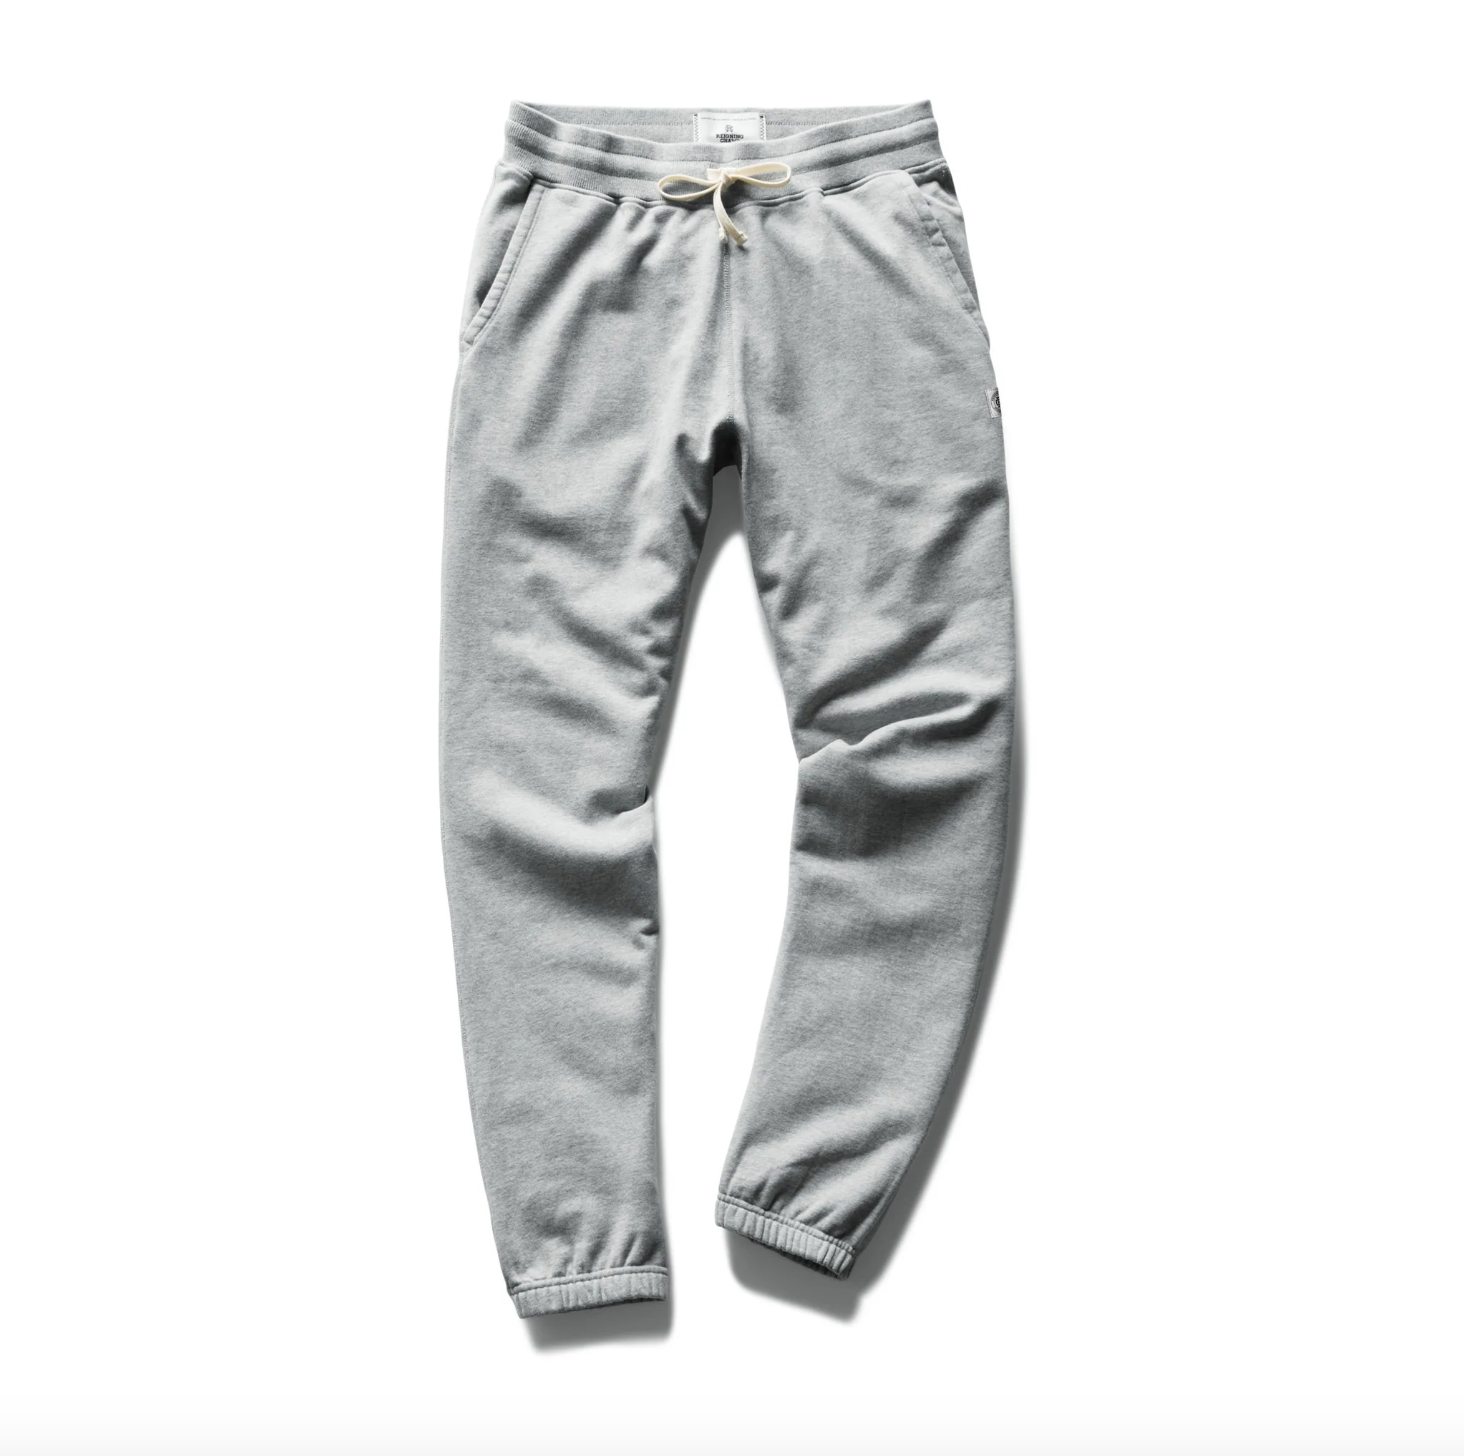 Reigning Champ- Knit MidWeight Terry Cuffed Sweat Pant